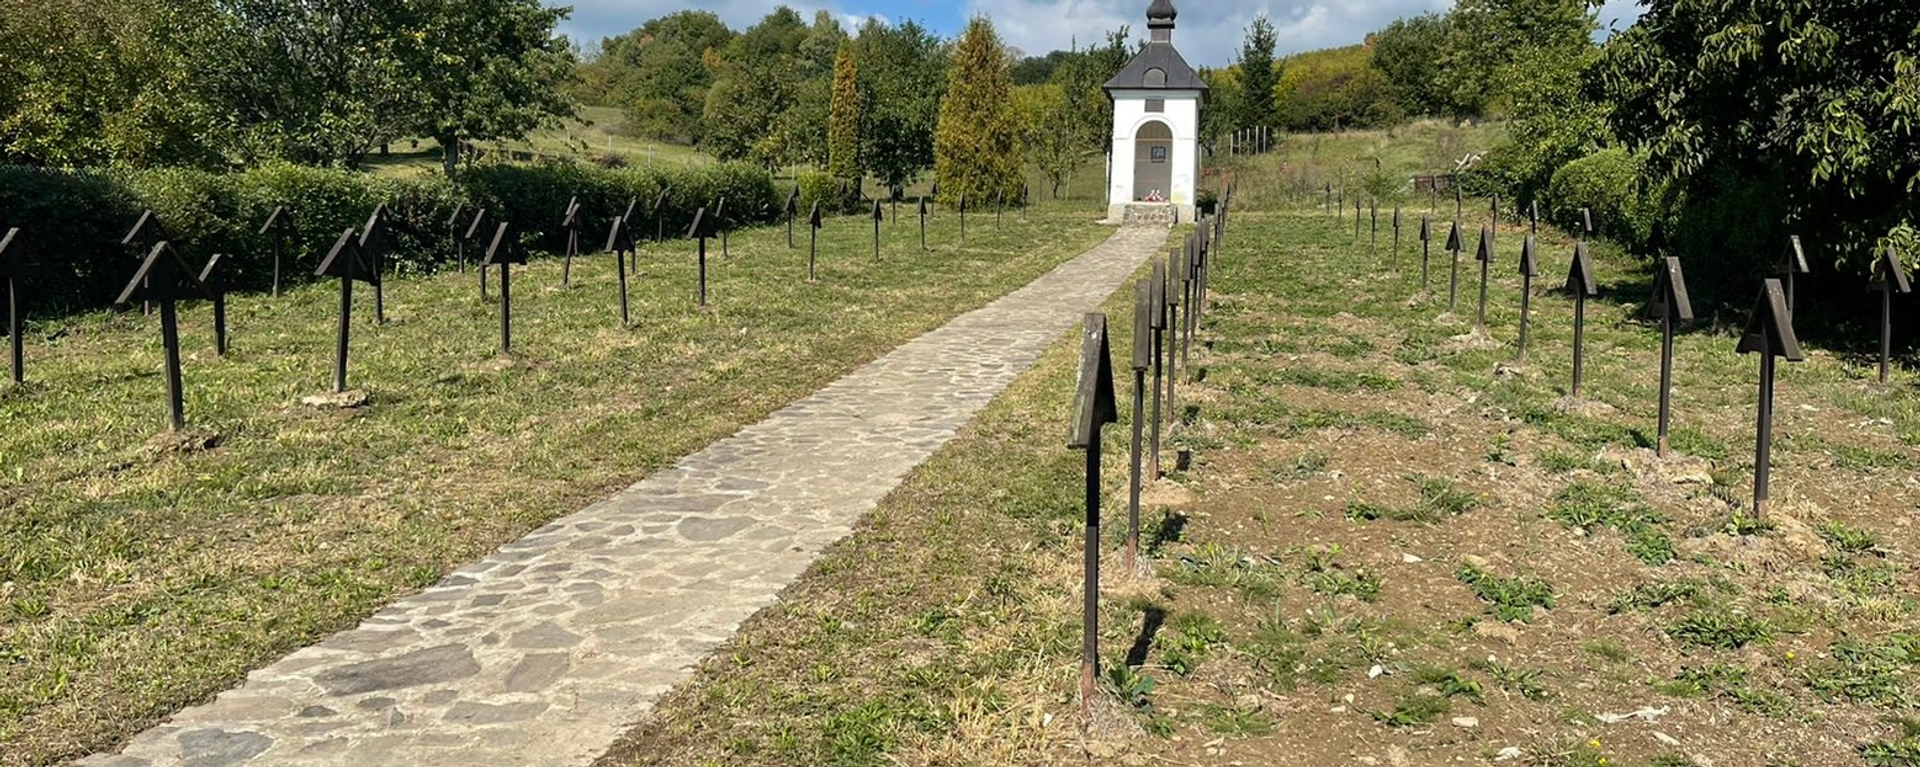 Cemetery containing final resting places of Imperial Russian Army soldiers in northeastern Slovakia that was vandalized by local authorities this summer. - Sputnik International, 1920, 15.09.2022